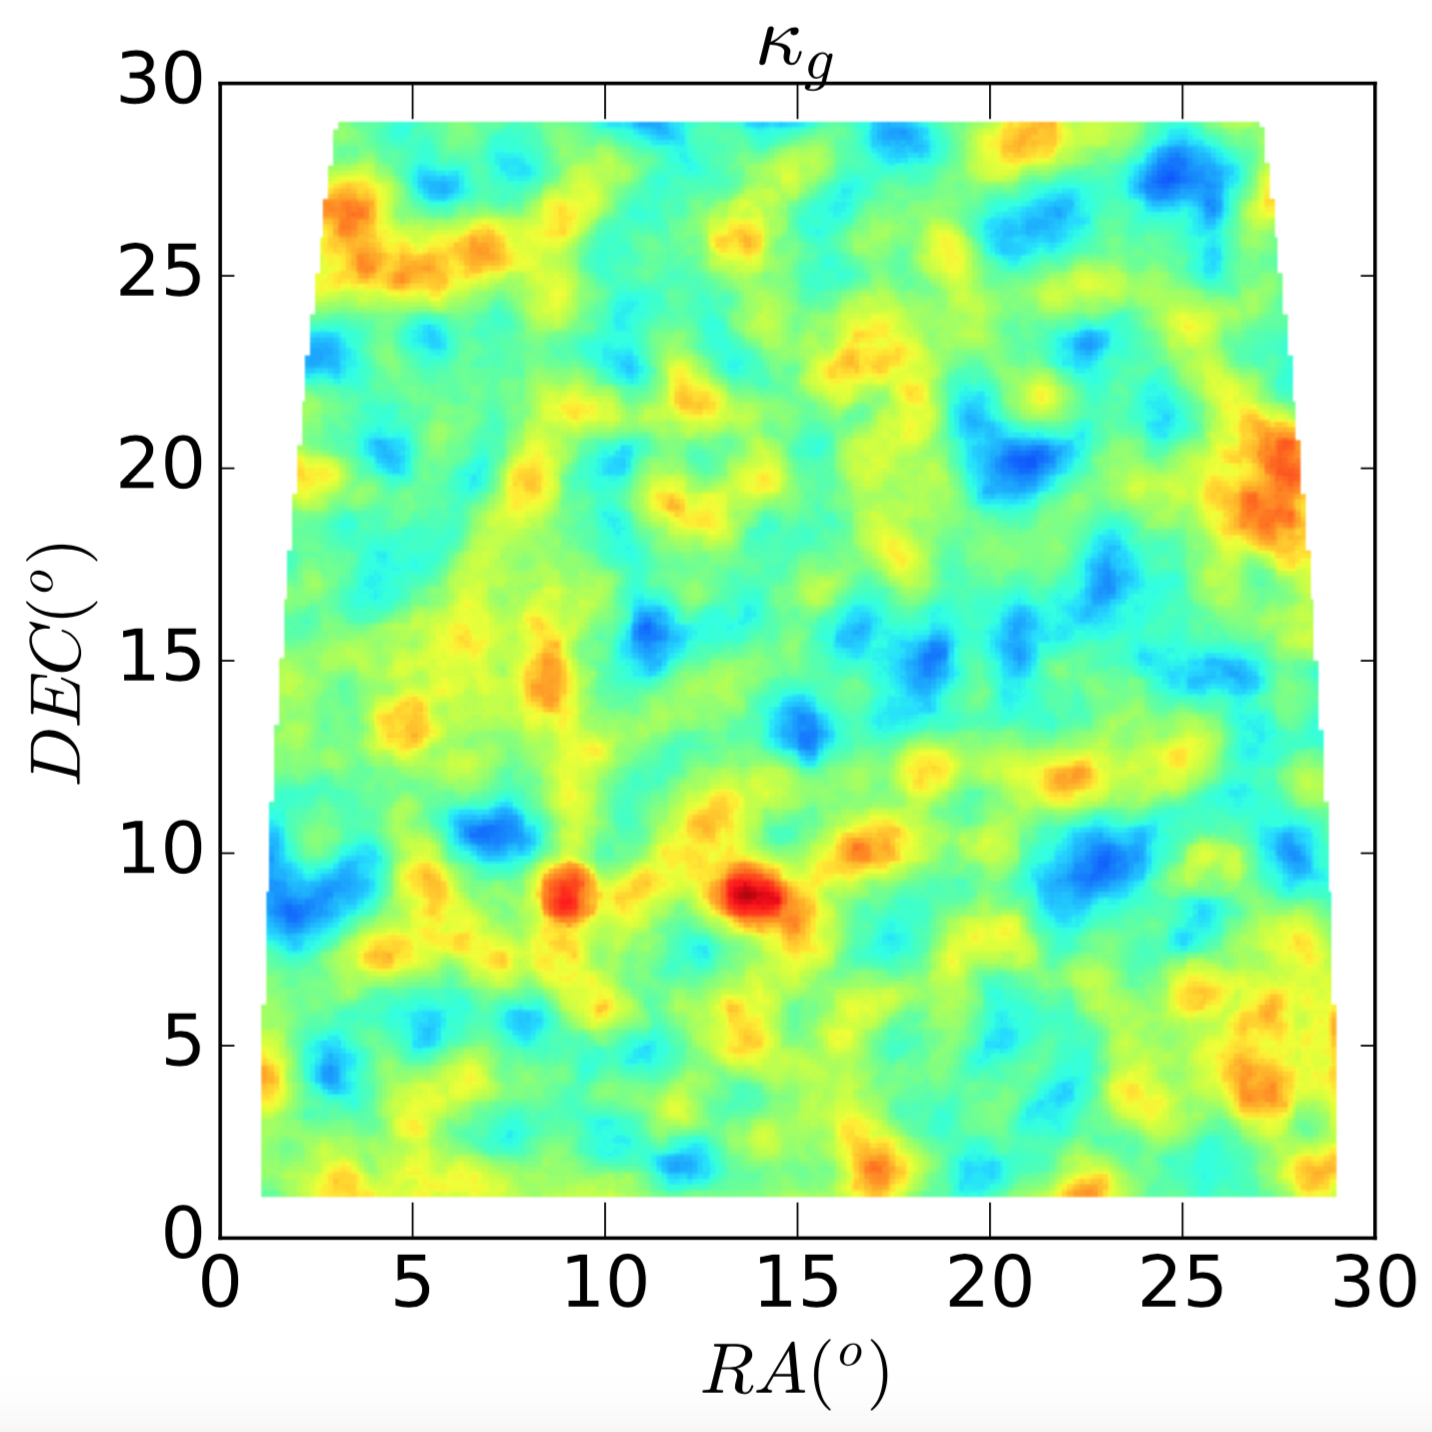 A new method to measure galaxy bias by combining the density and weak lensing fields